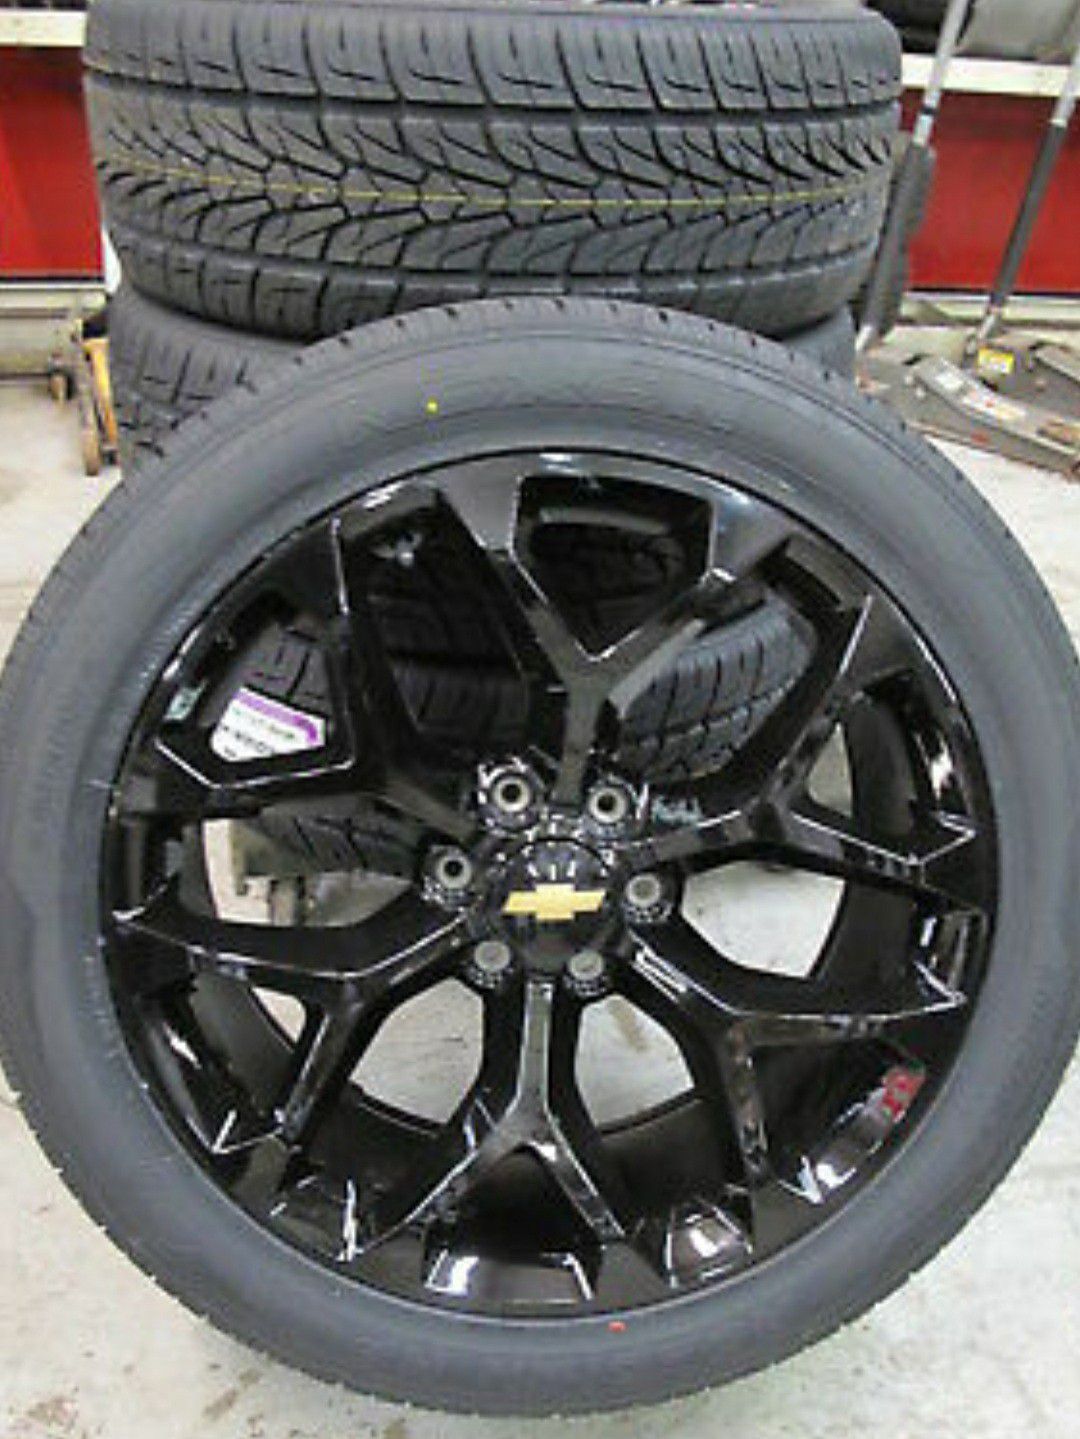 24" snowflakes gloss blk with tires